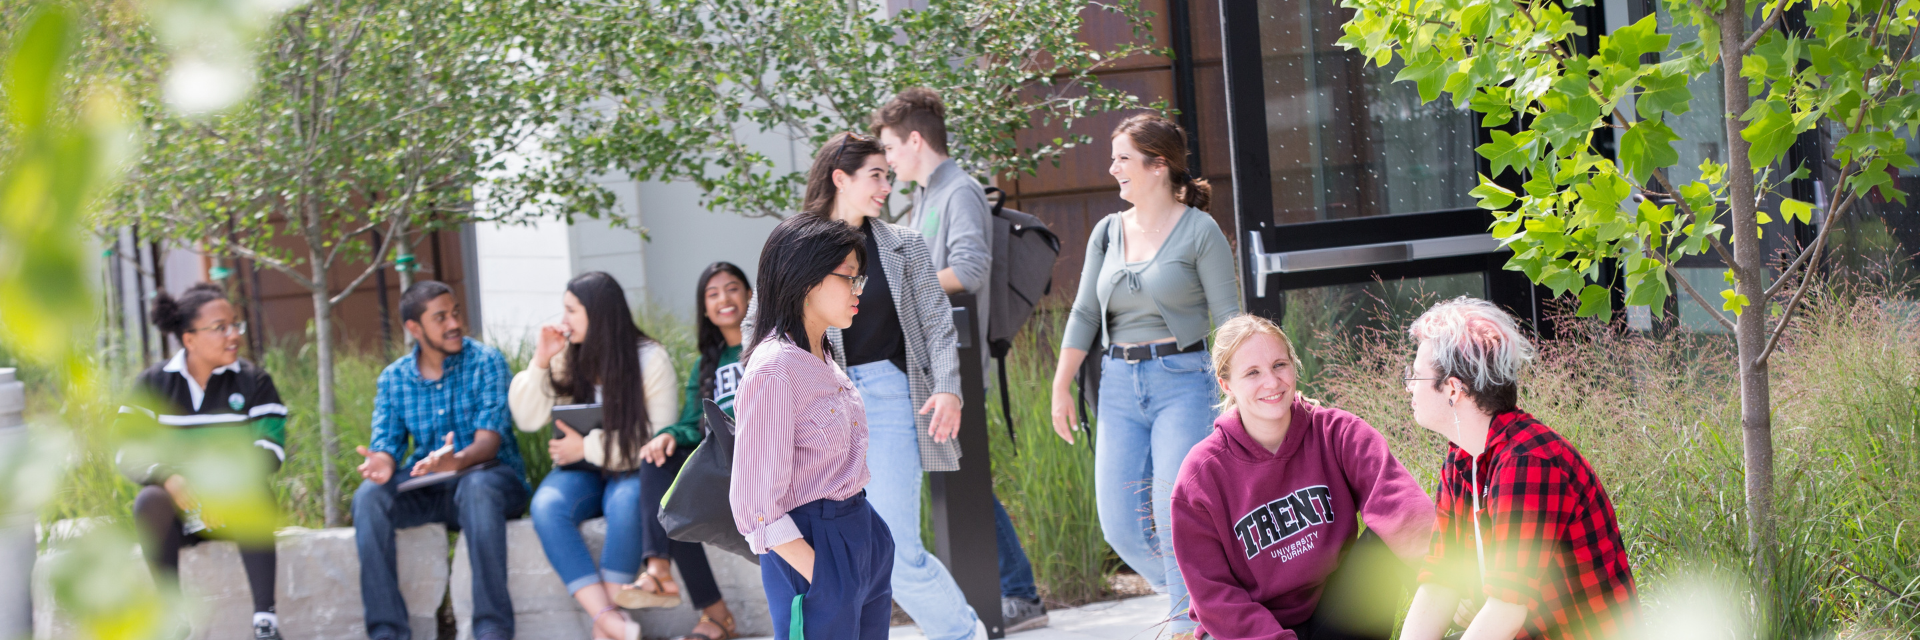 Students mingling outside on the Trent Durham campus